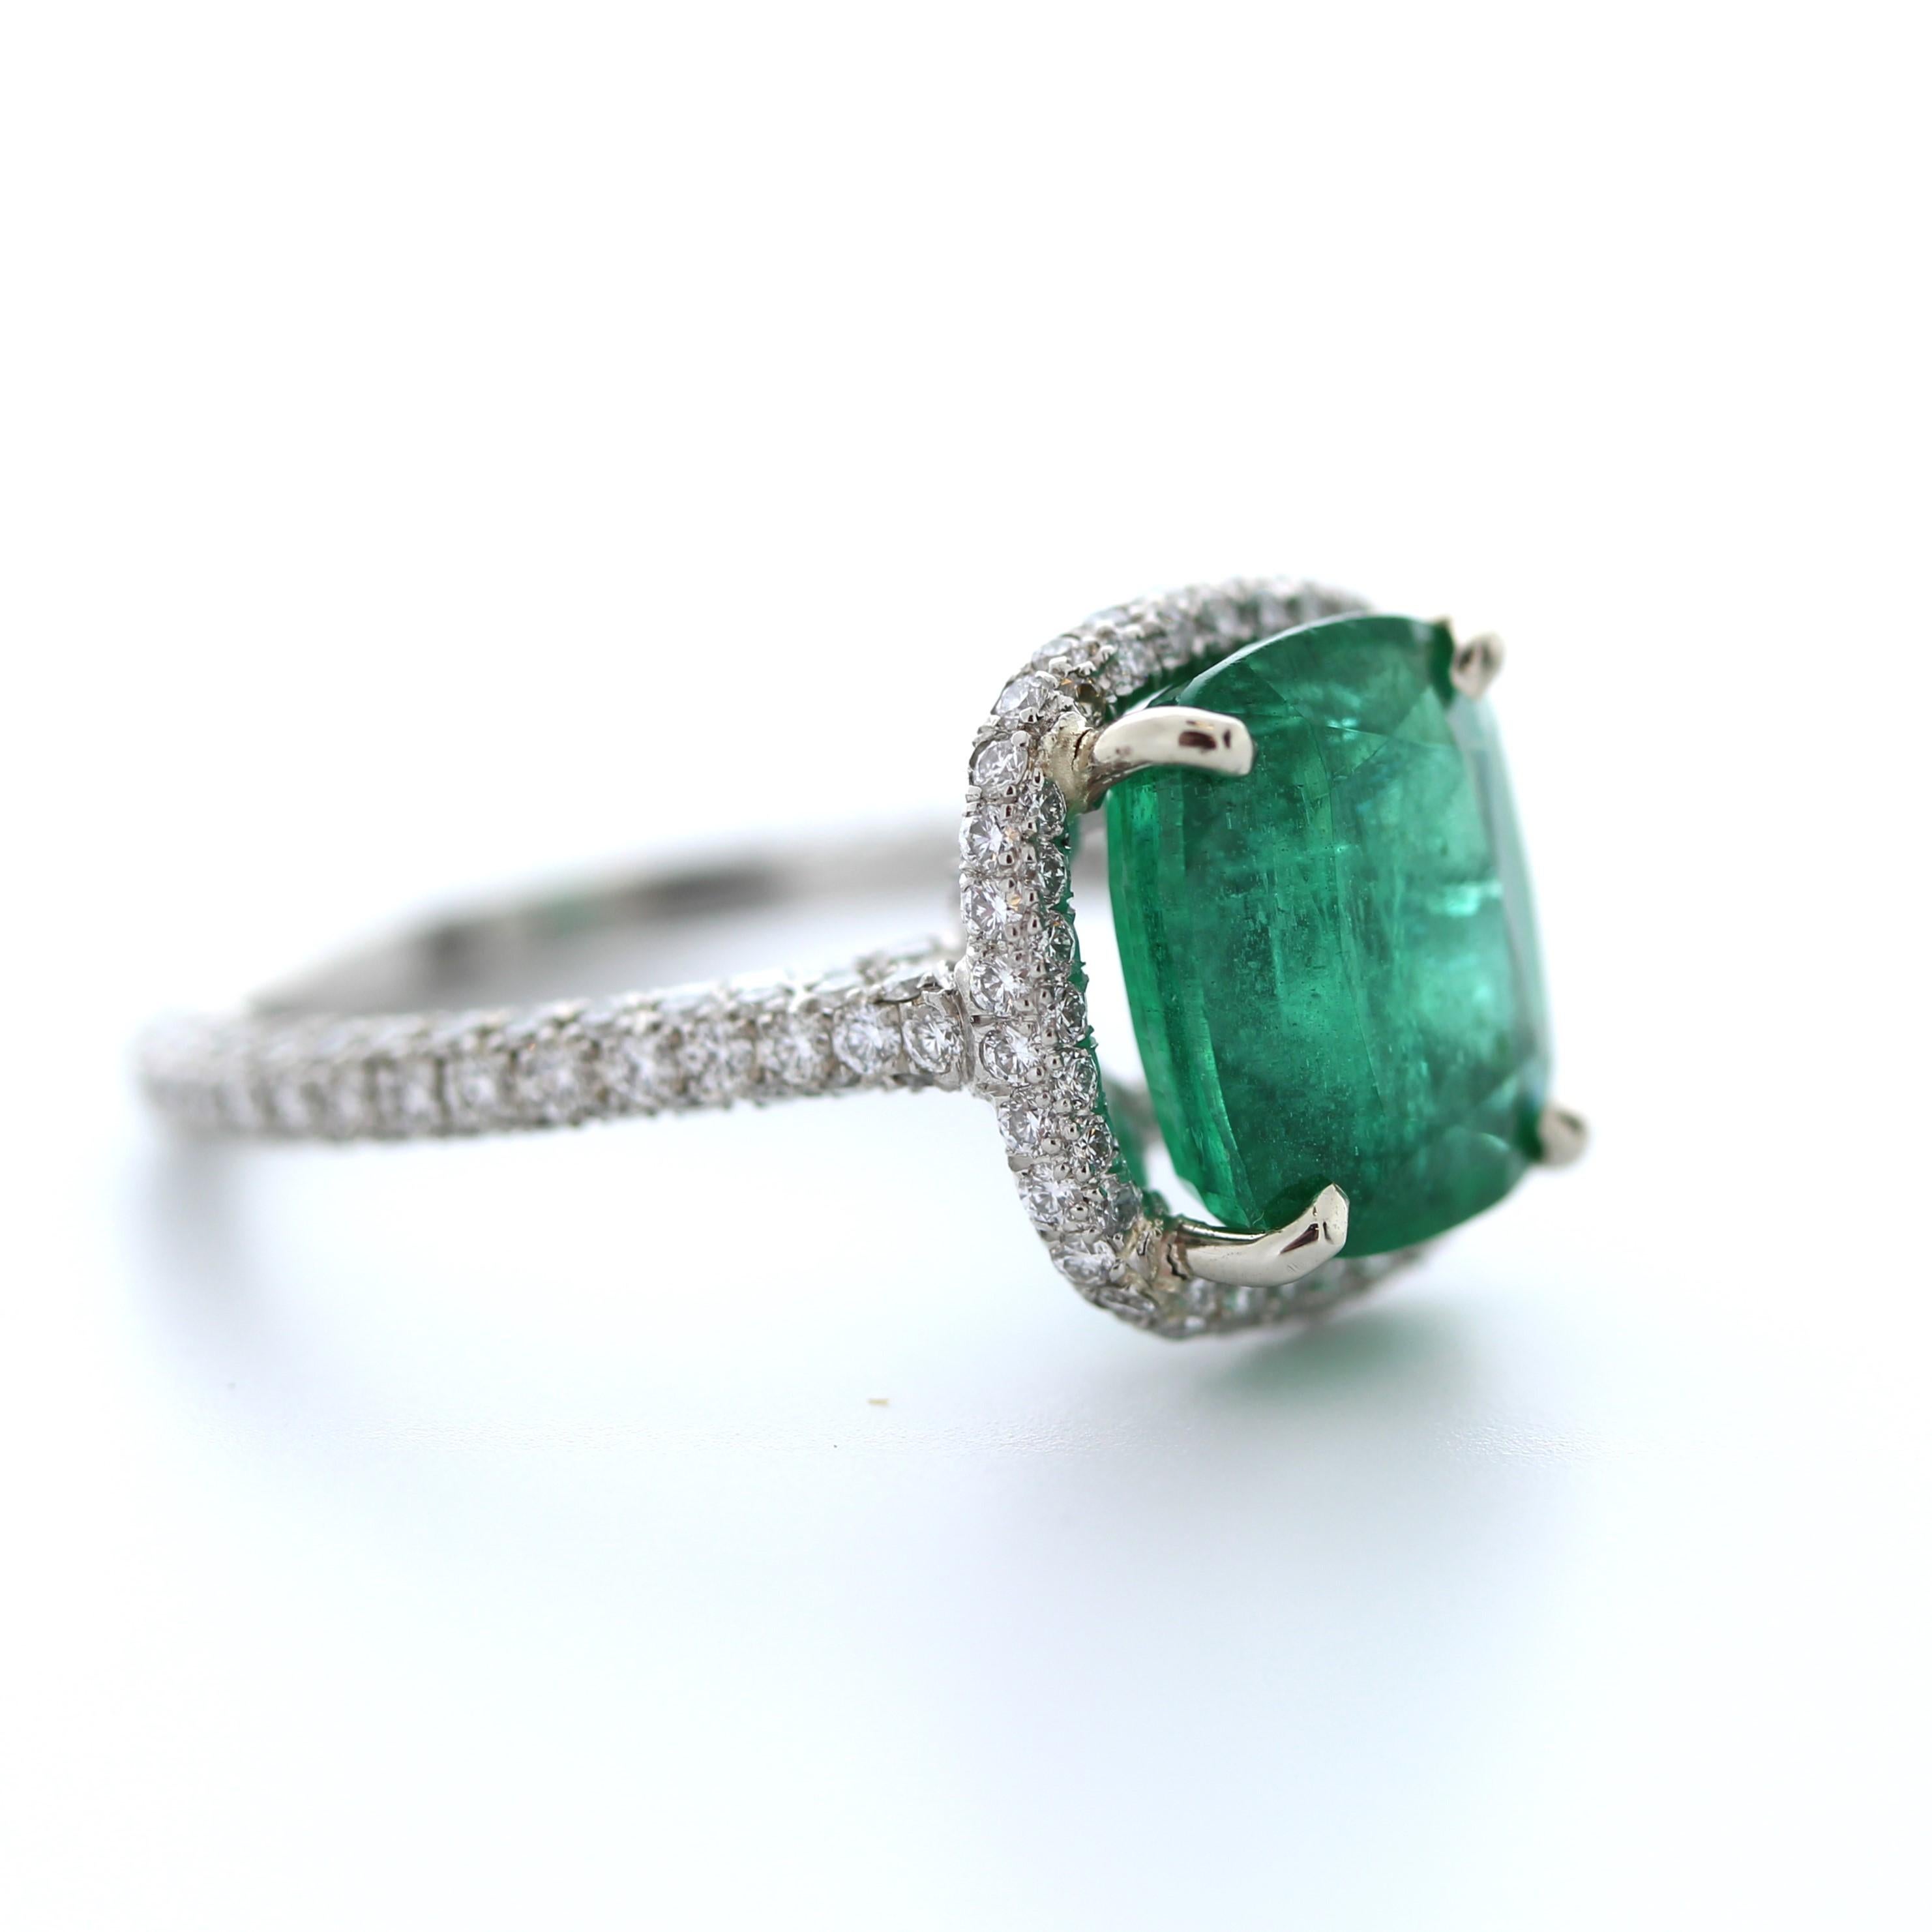 The 3.69 Carat Green Emerald Cushion Shape & Diamond Ring in Platinum is a magnificent piece of jewelry that features a stunning green emerald as its centerpiece. The emerald is a cushion-cut shape, which gives it a classic and timeless look. The